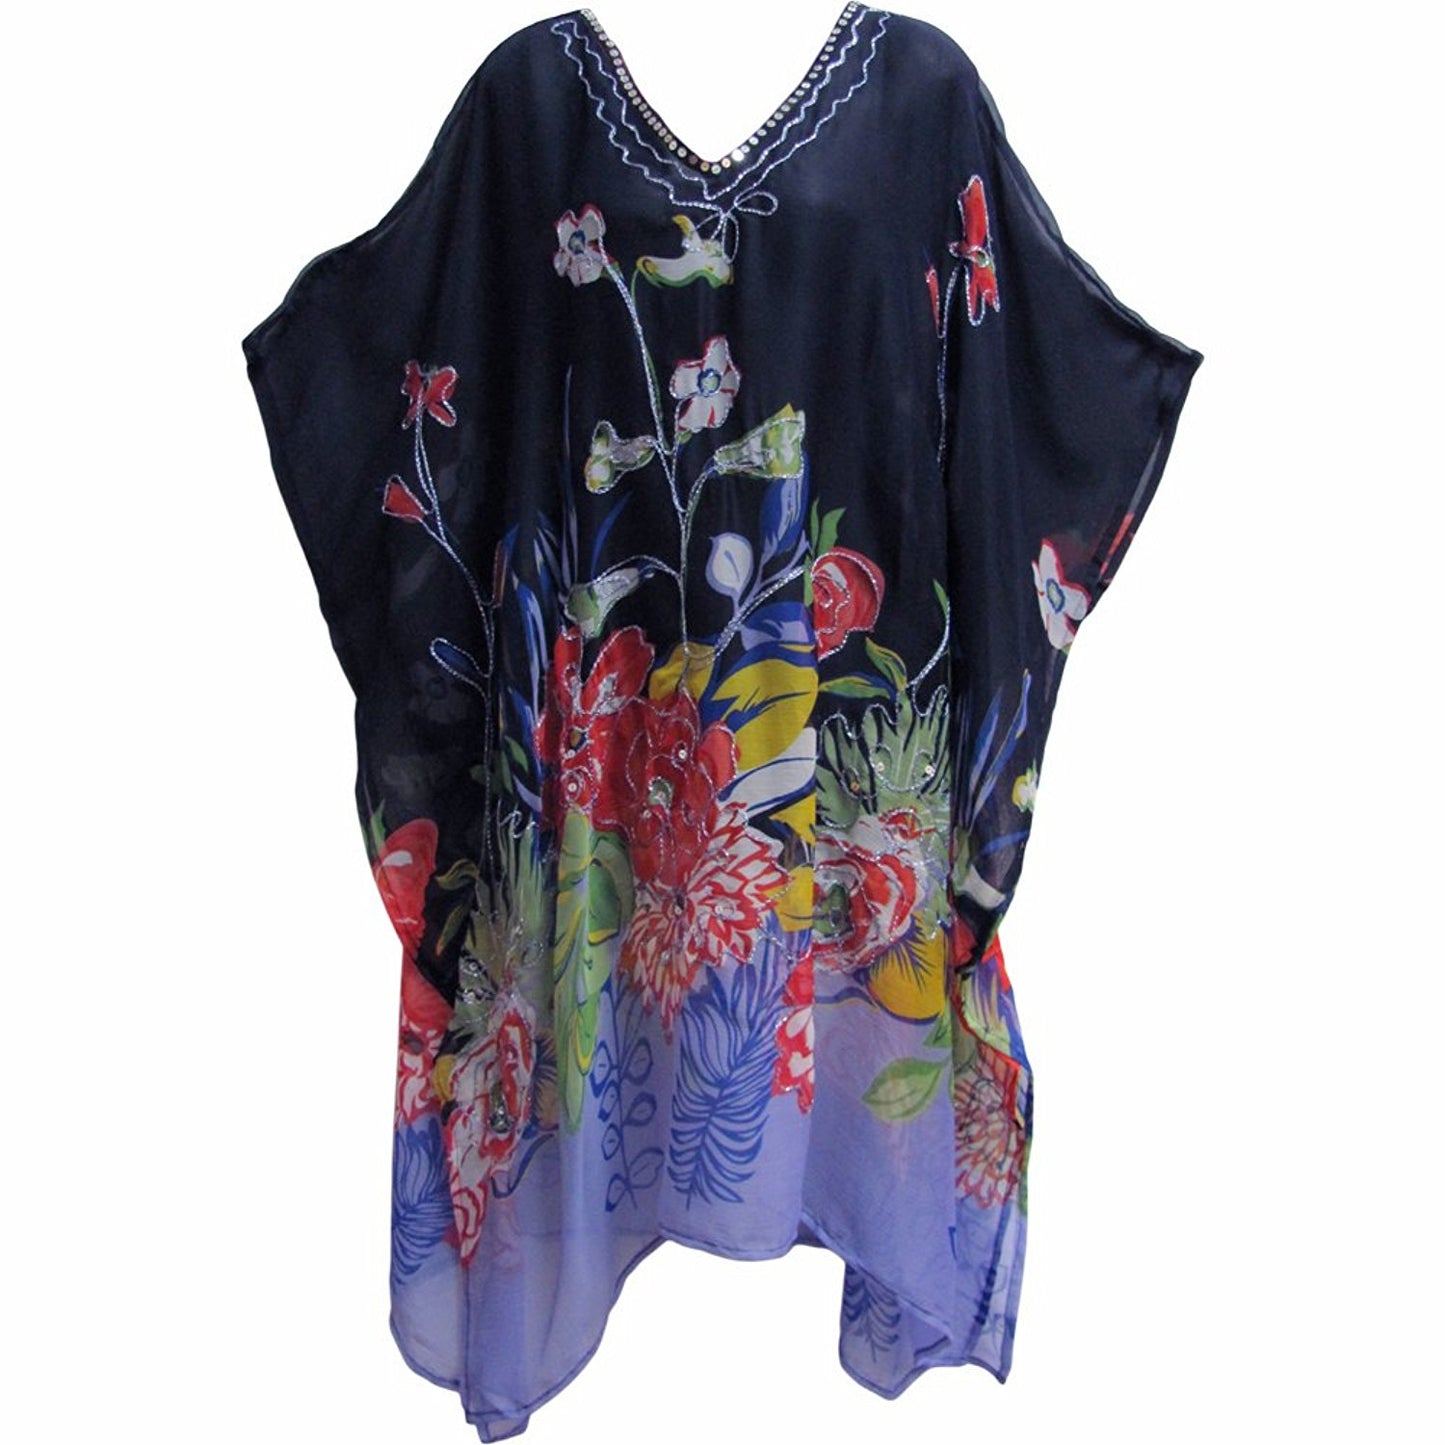 Missy Plus Indian Sequined Chiffon Cover Up Caftan Poncho Navy Blue Floral JK #15 - Ambali Fashion Caftans and Coverups 